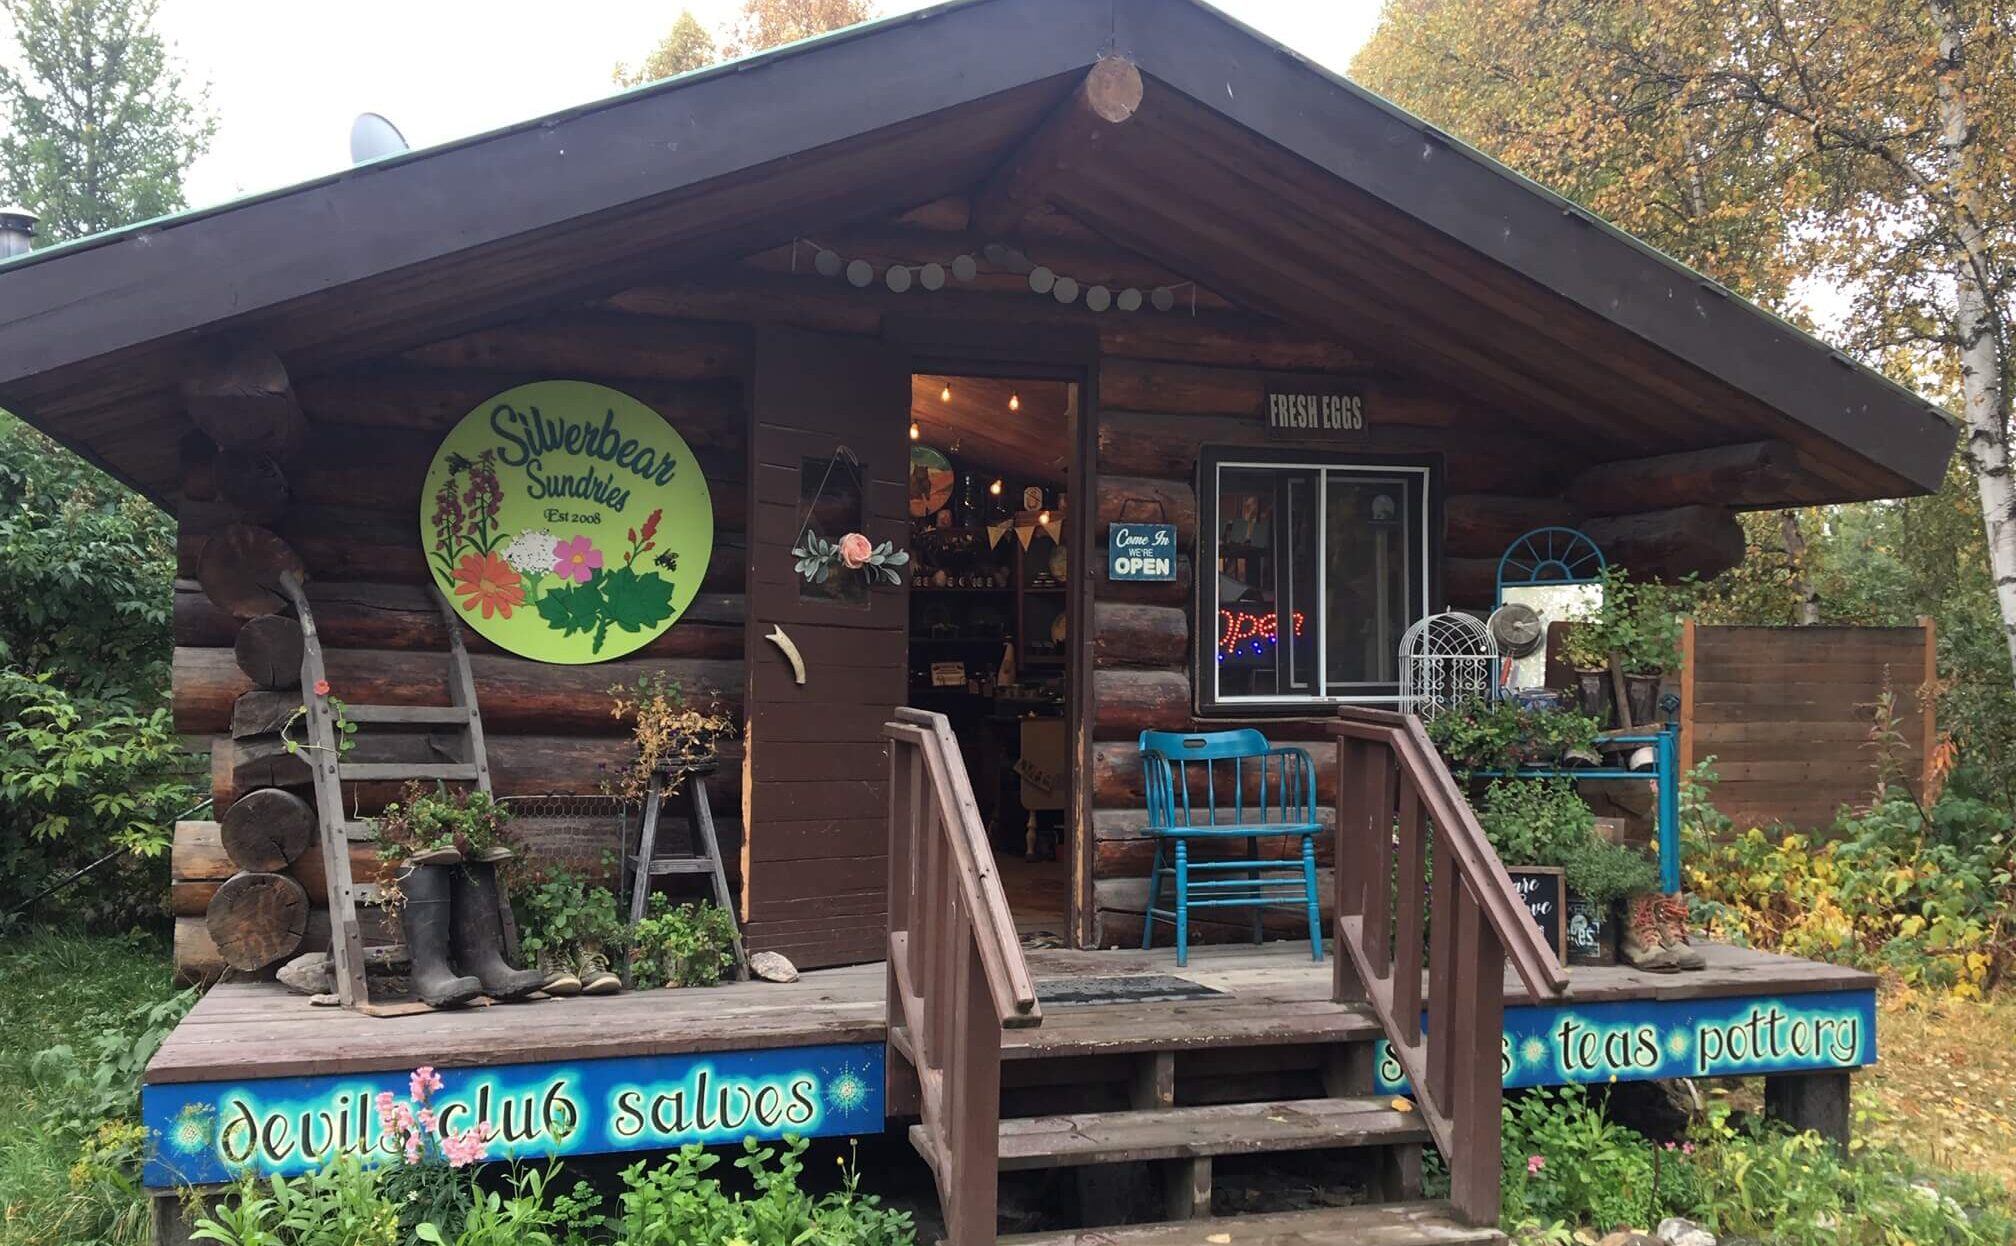 Things To Do In Talkeetna, AK